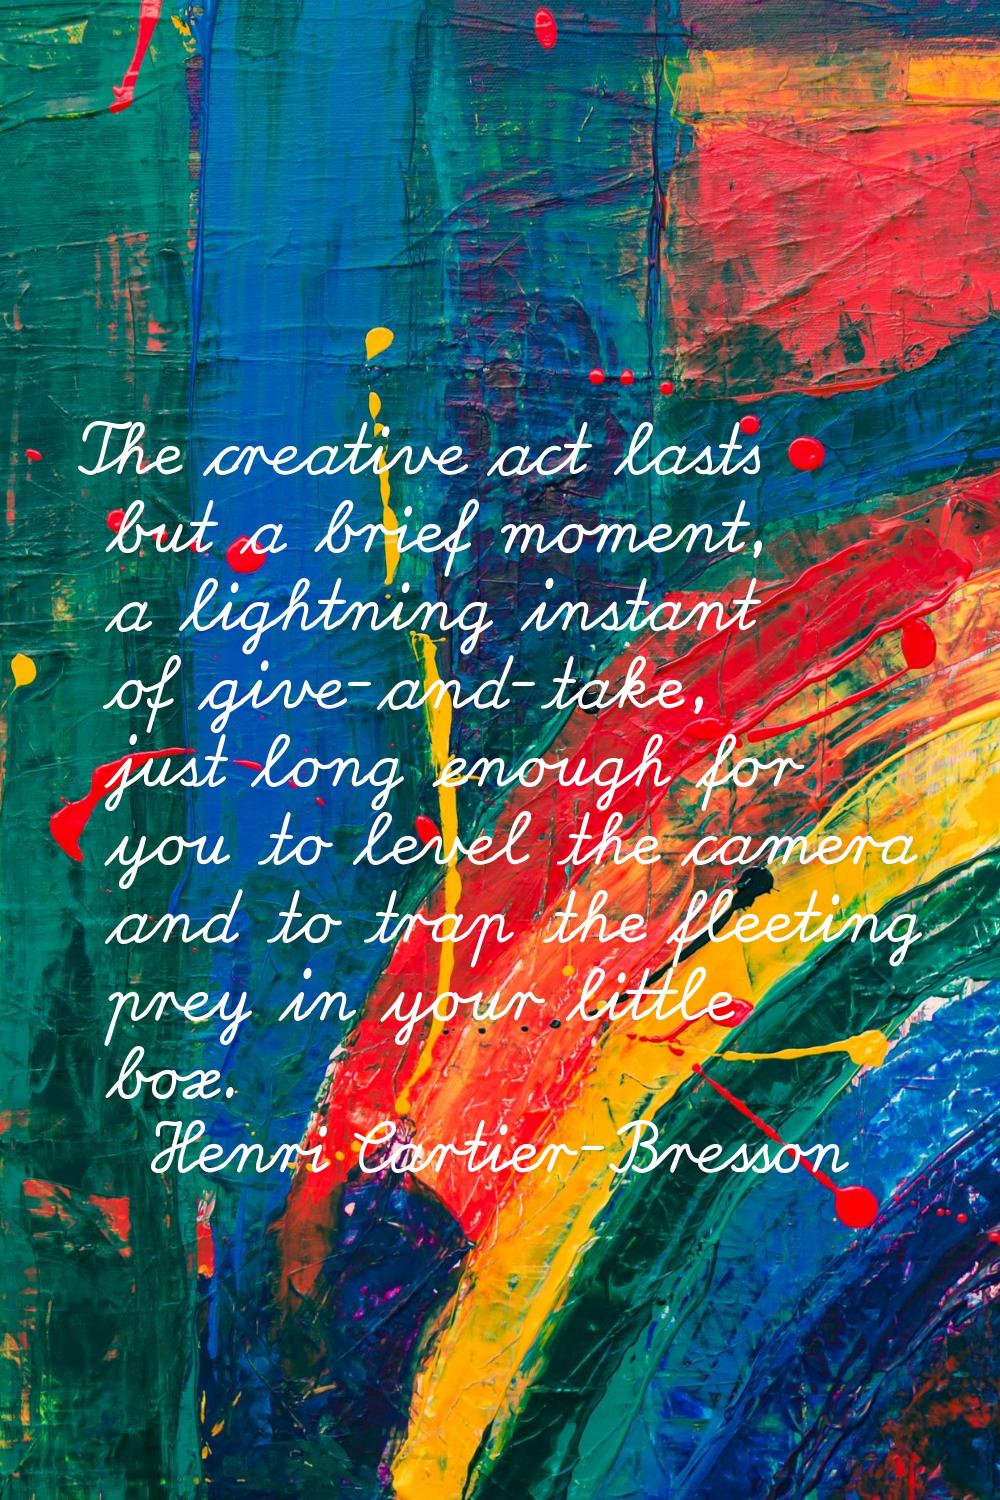 The creative act lasts but a brief moment, a lightning instant of give-and-take, just long enough f